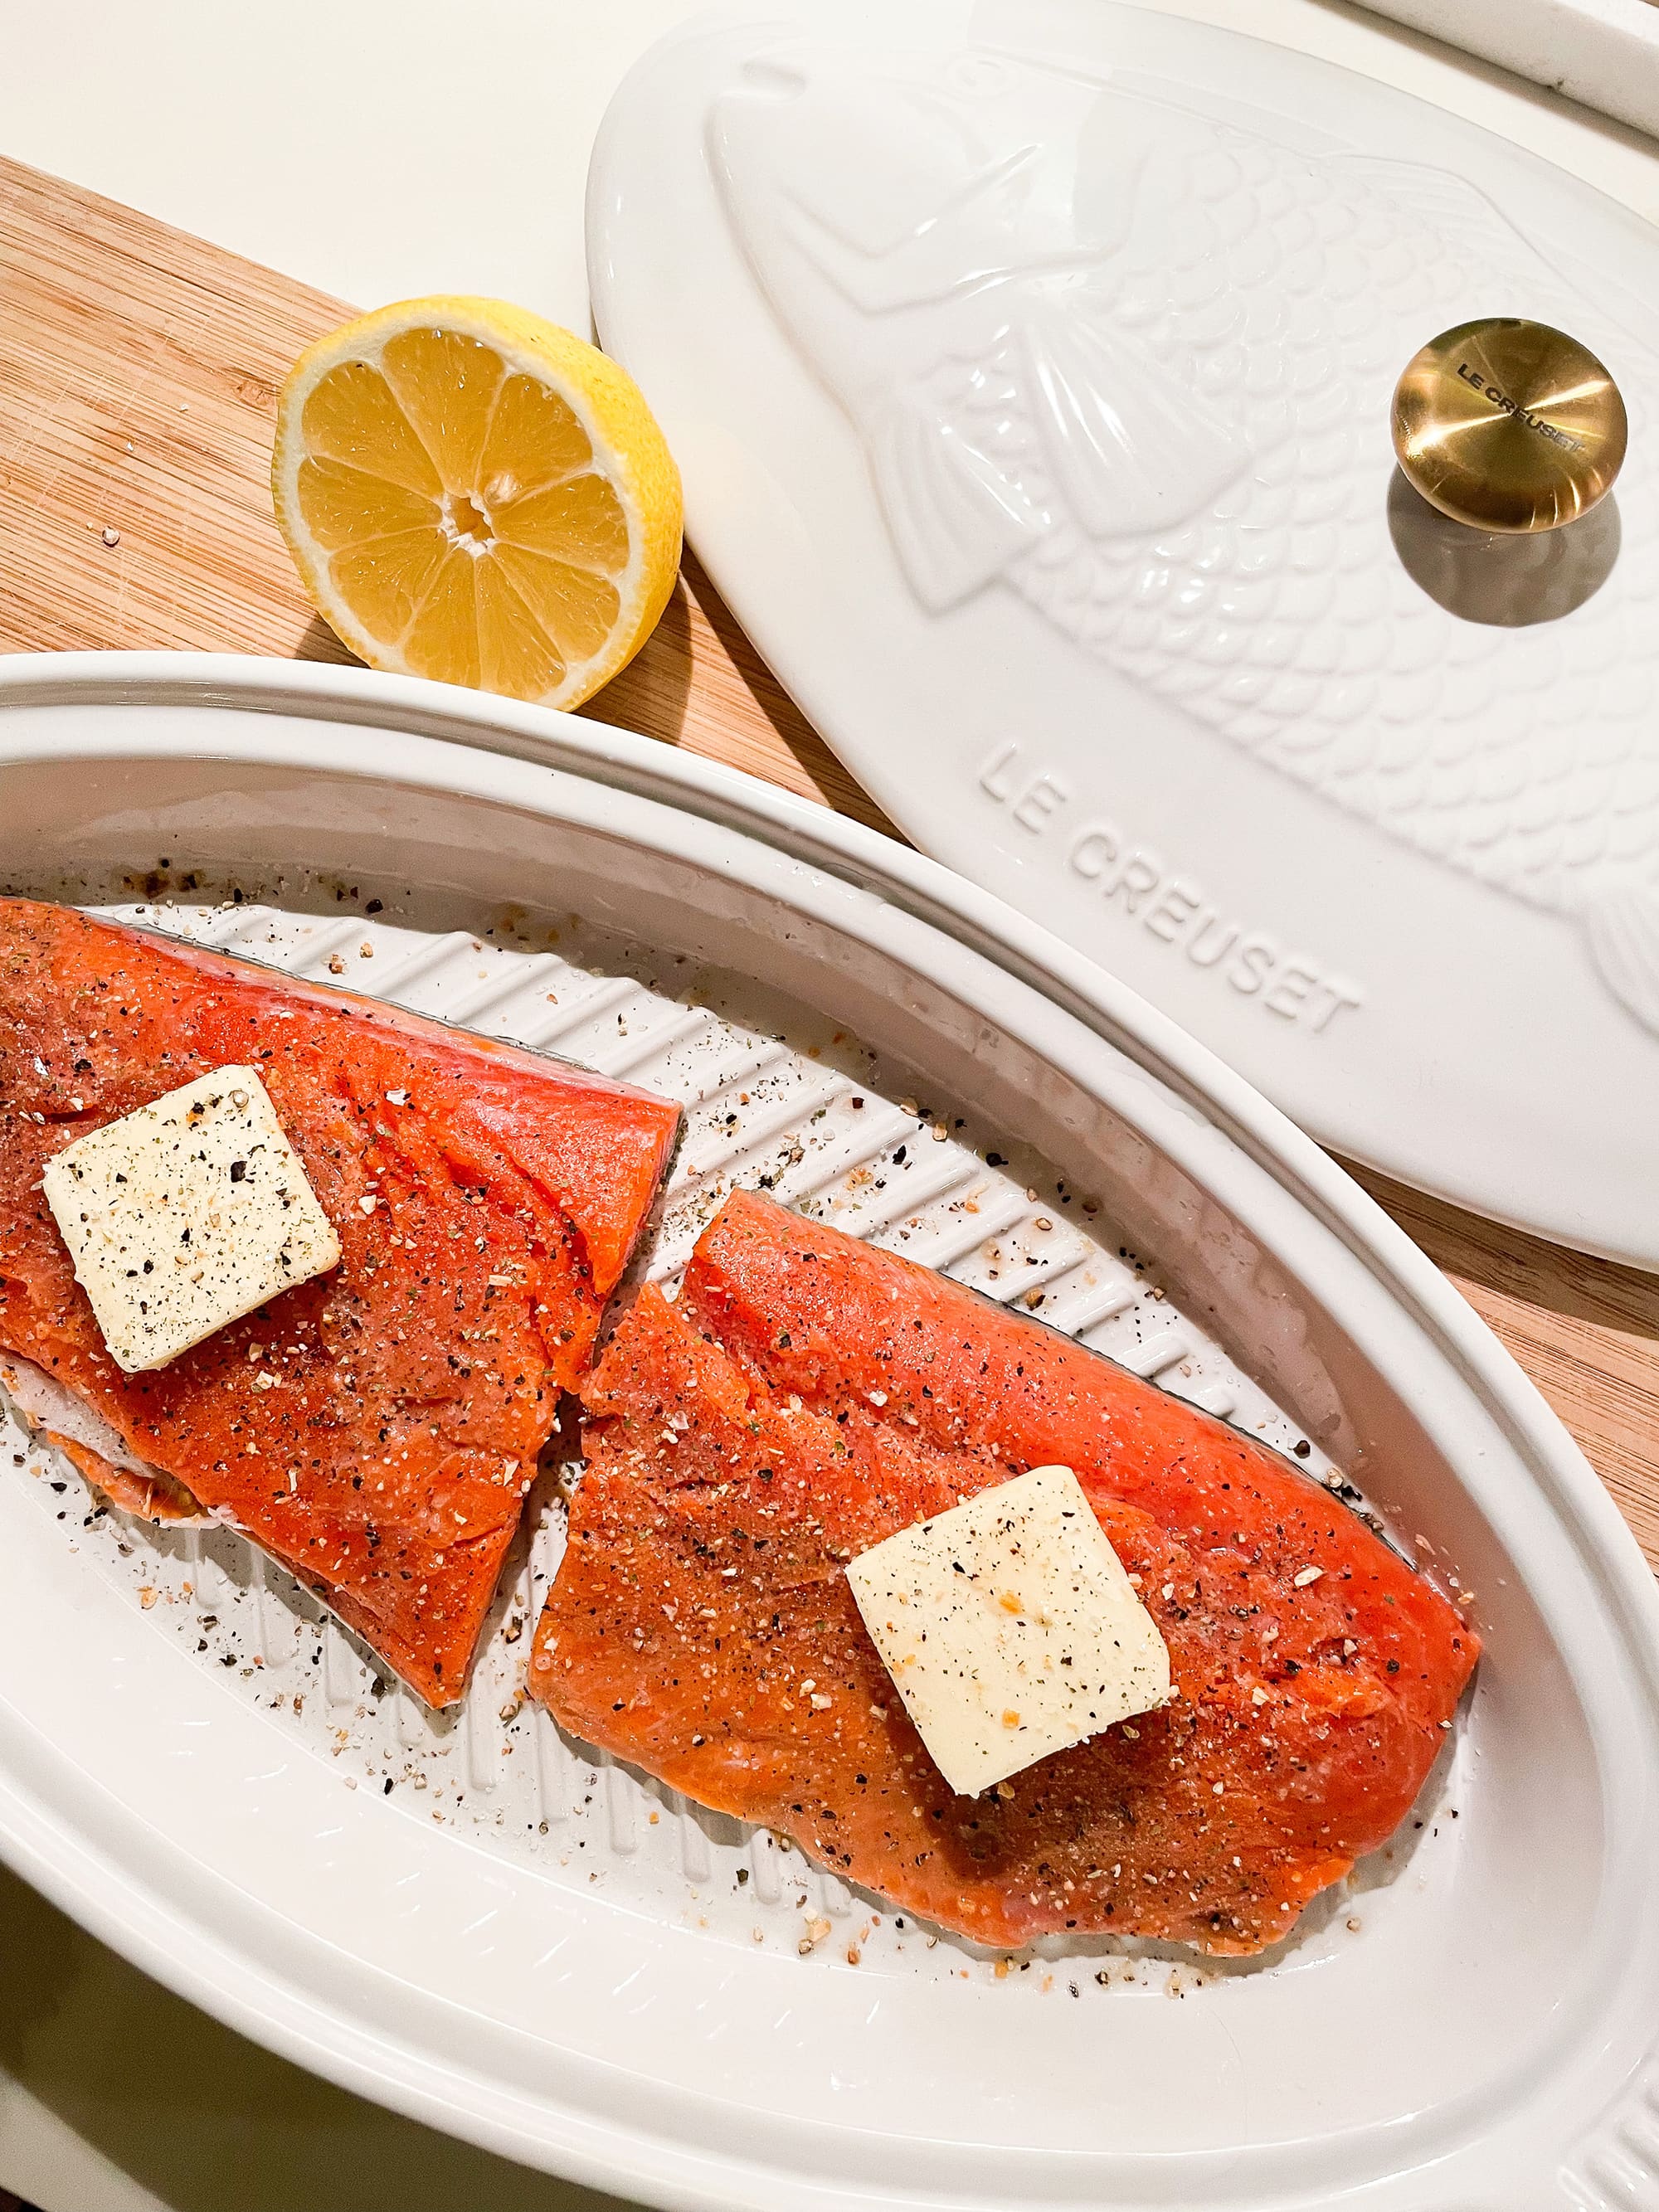 How to Use the Le Creuset Fish Baker